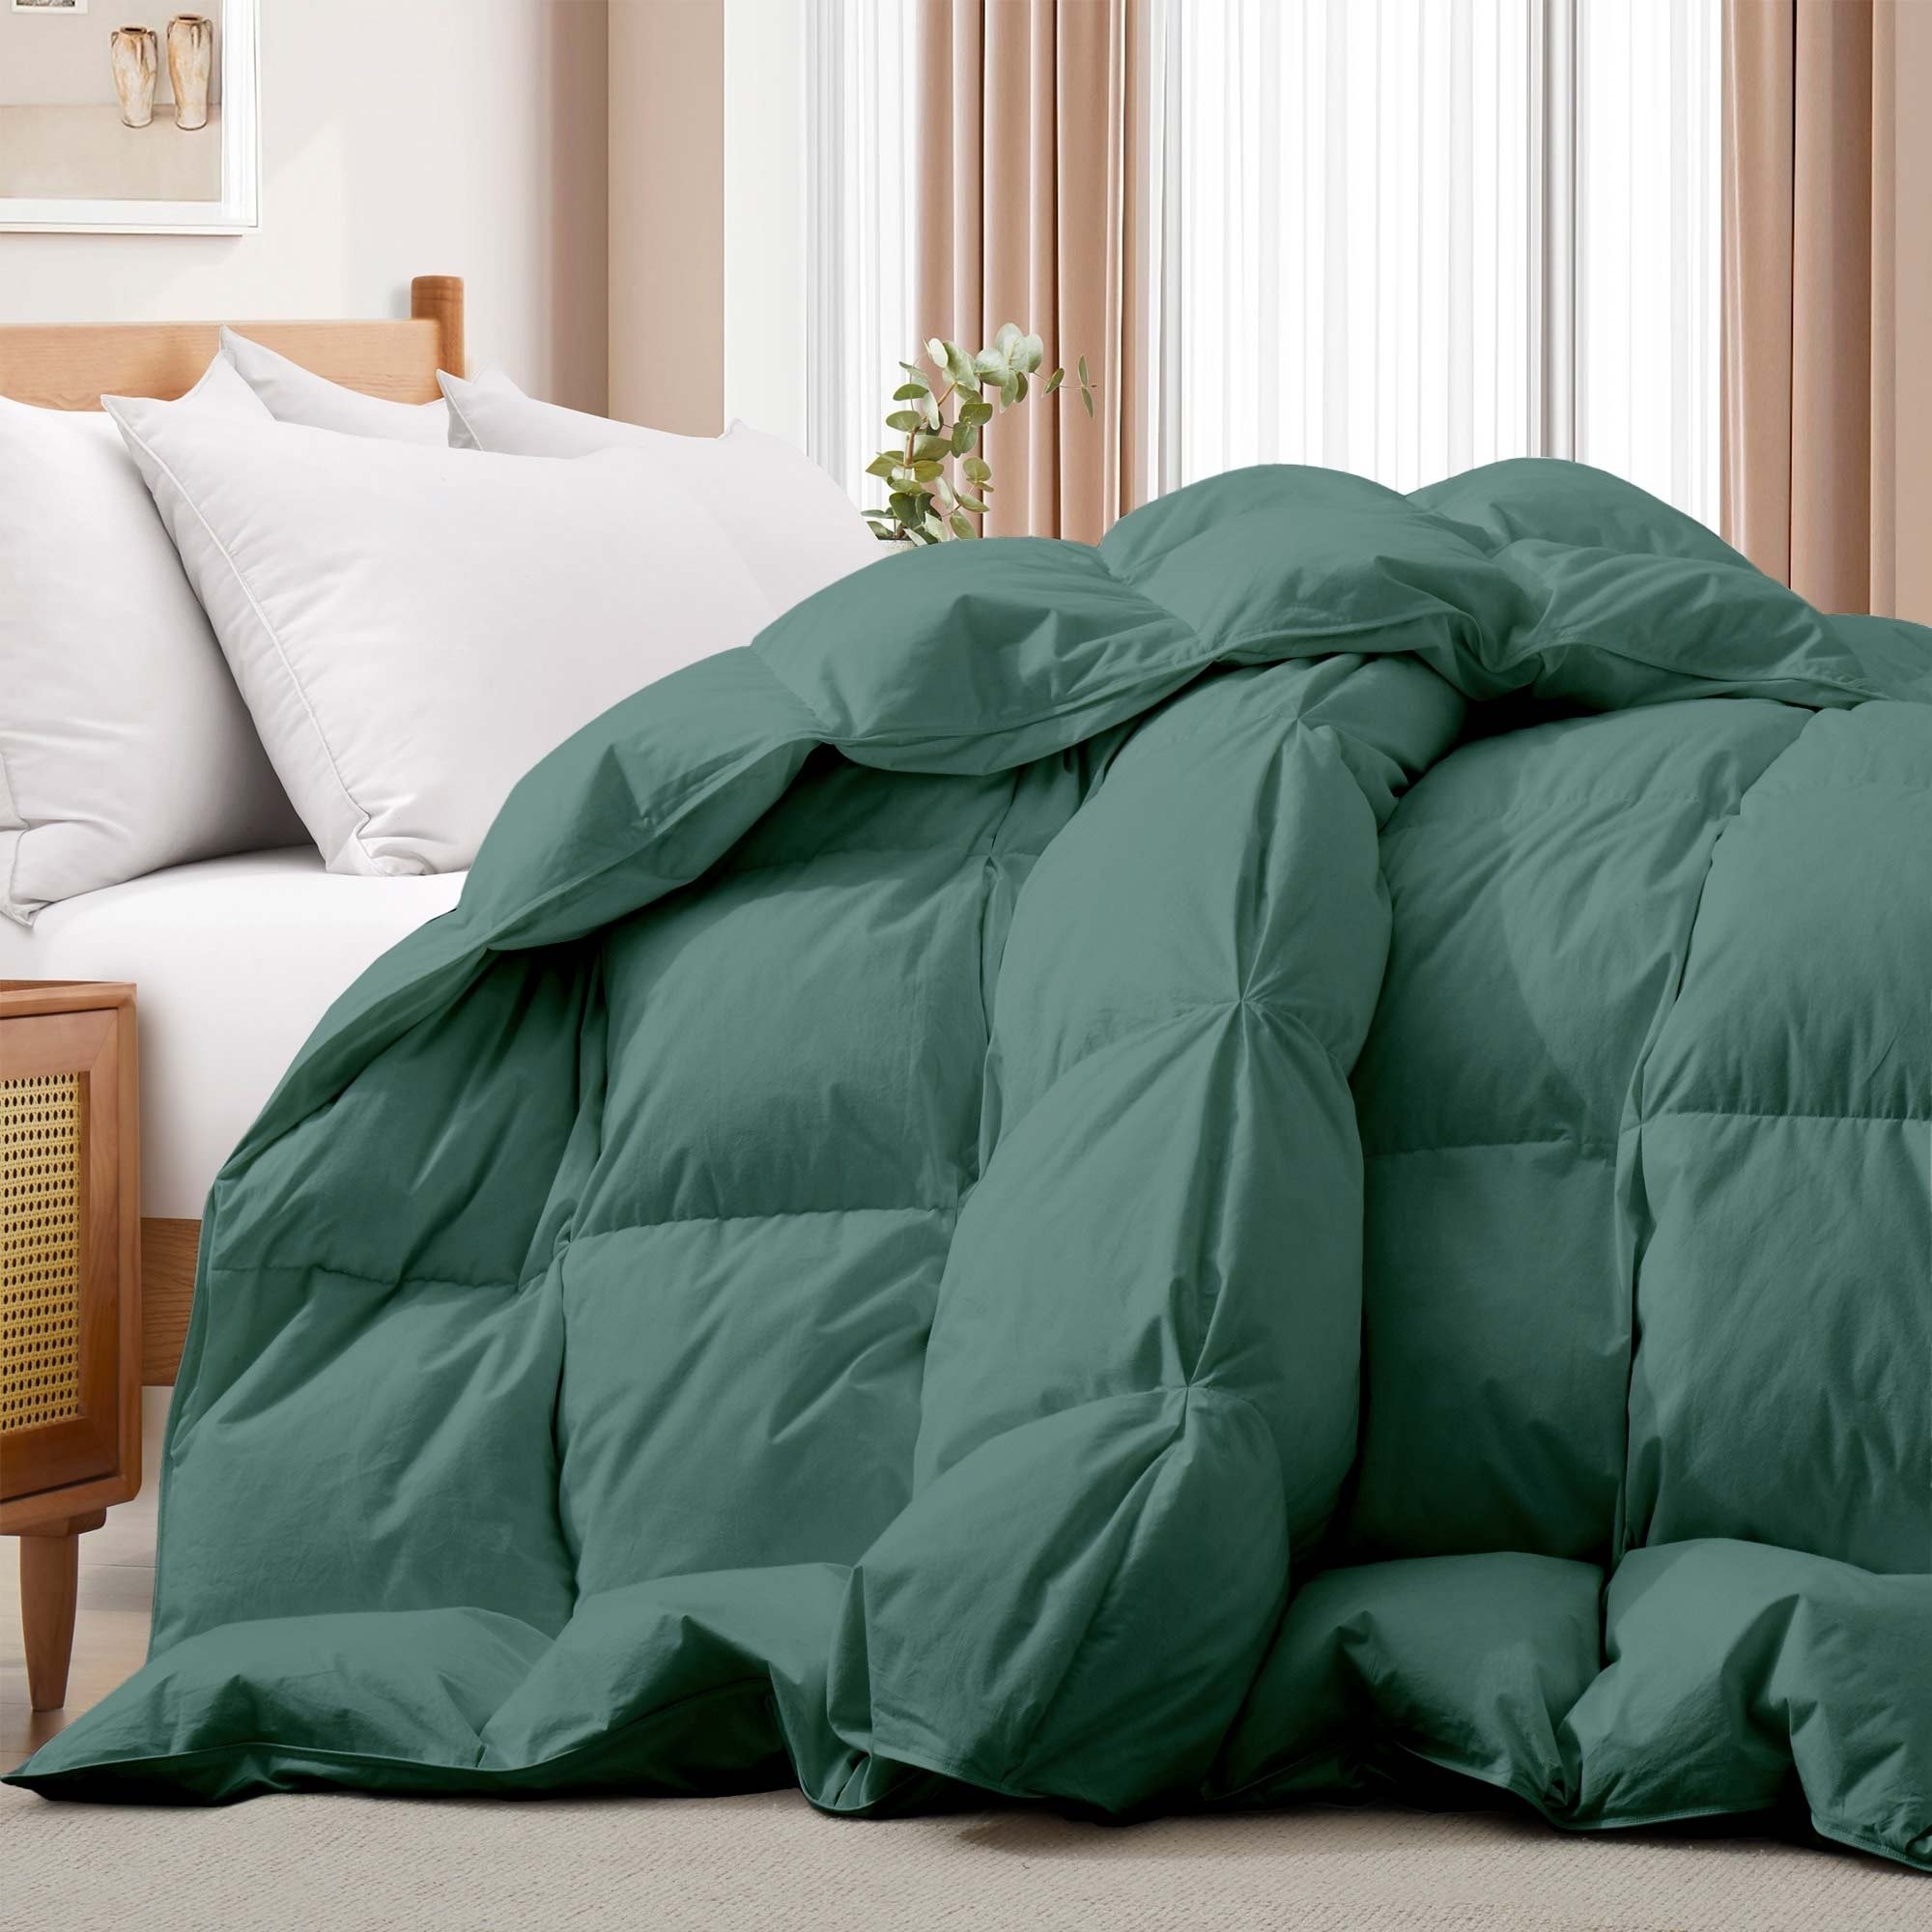 All Seasons Pinch Pleat Goose Feather And Down Comforter-Breathable Cotton Fabric Baffled Box Duvet Insert - Smoke Pine, King